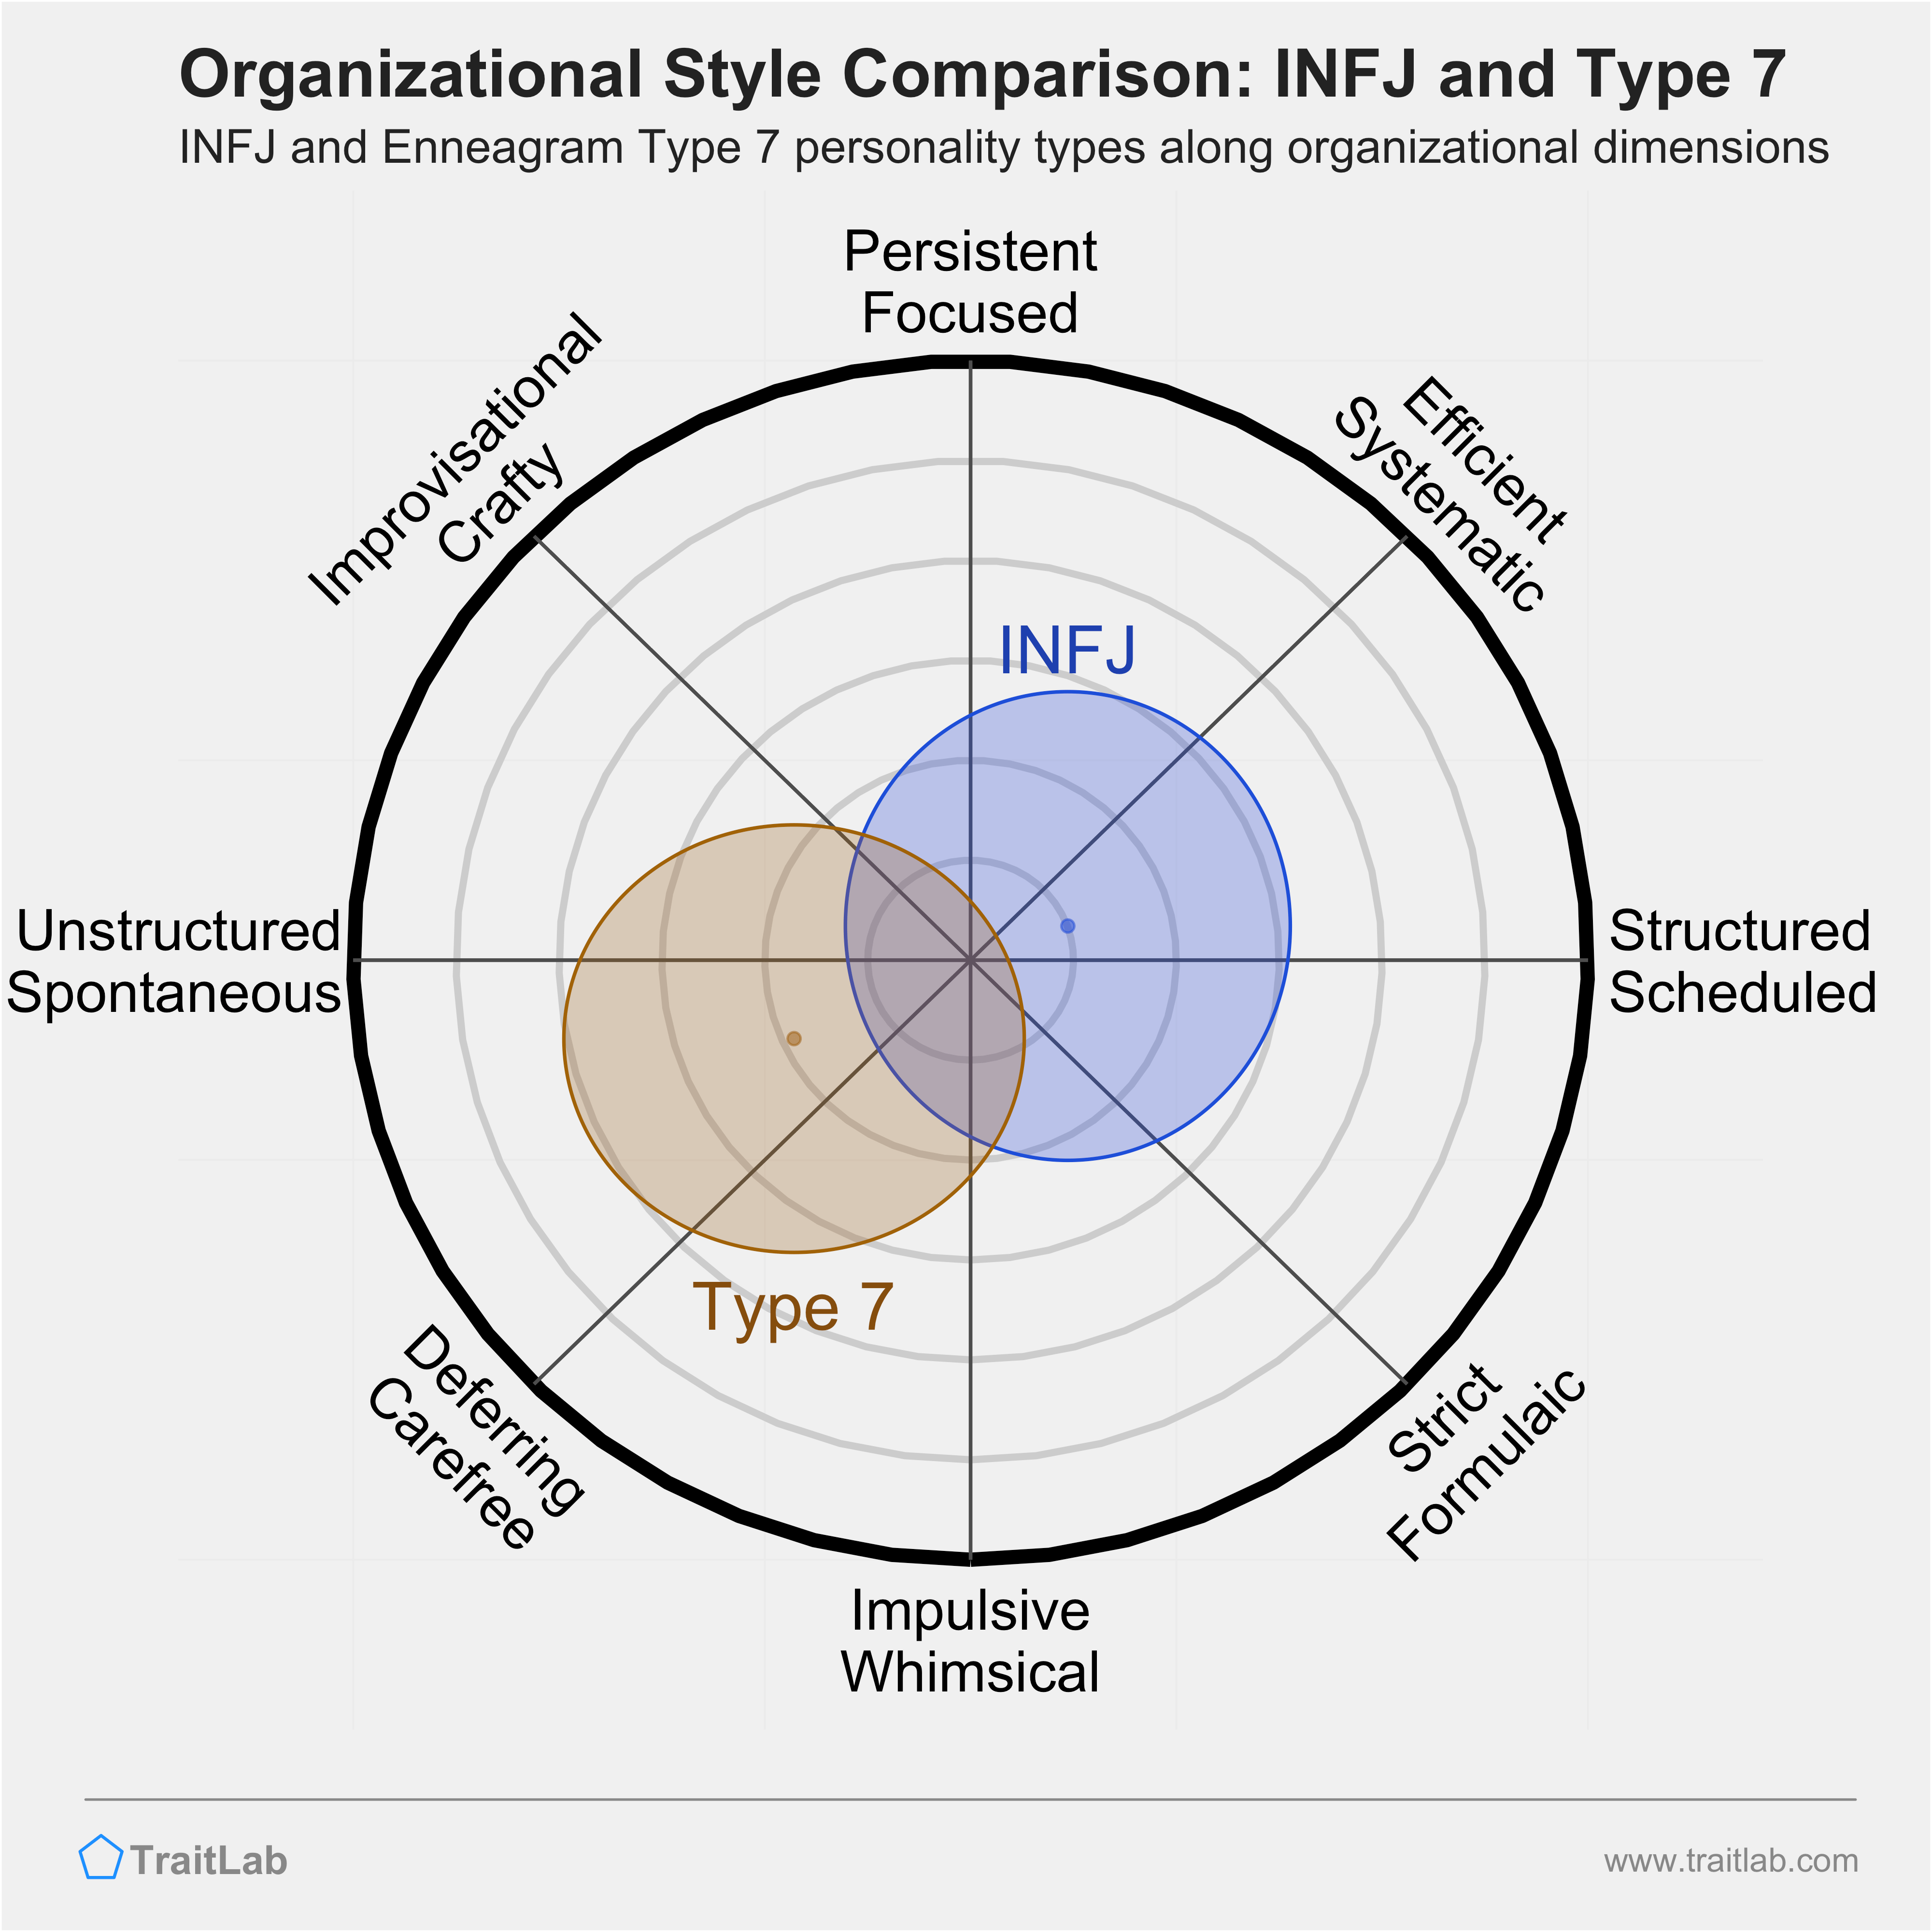 INFJ and Type 7 comparison across organizational dimensions